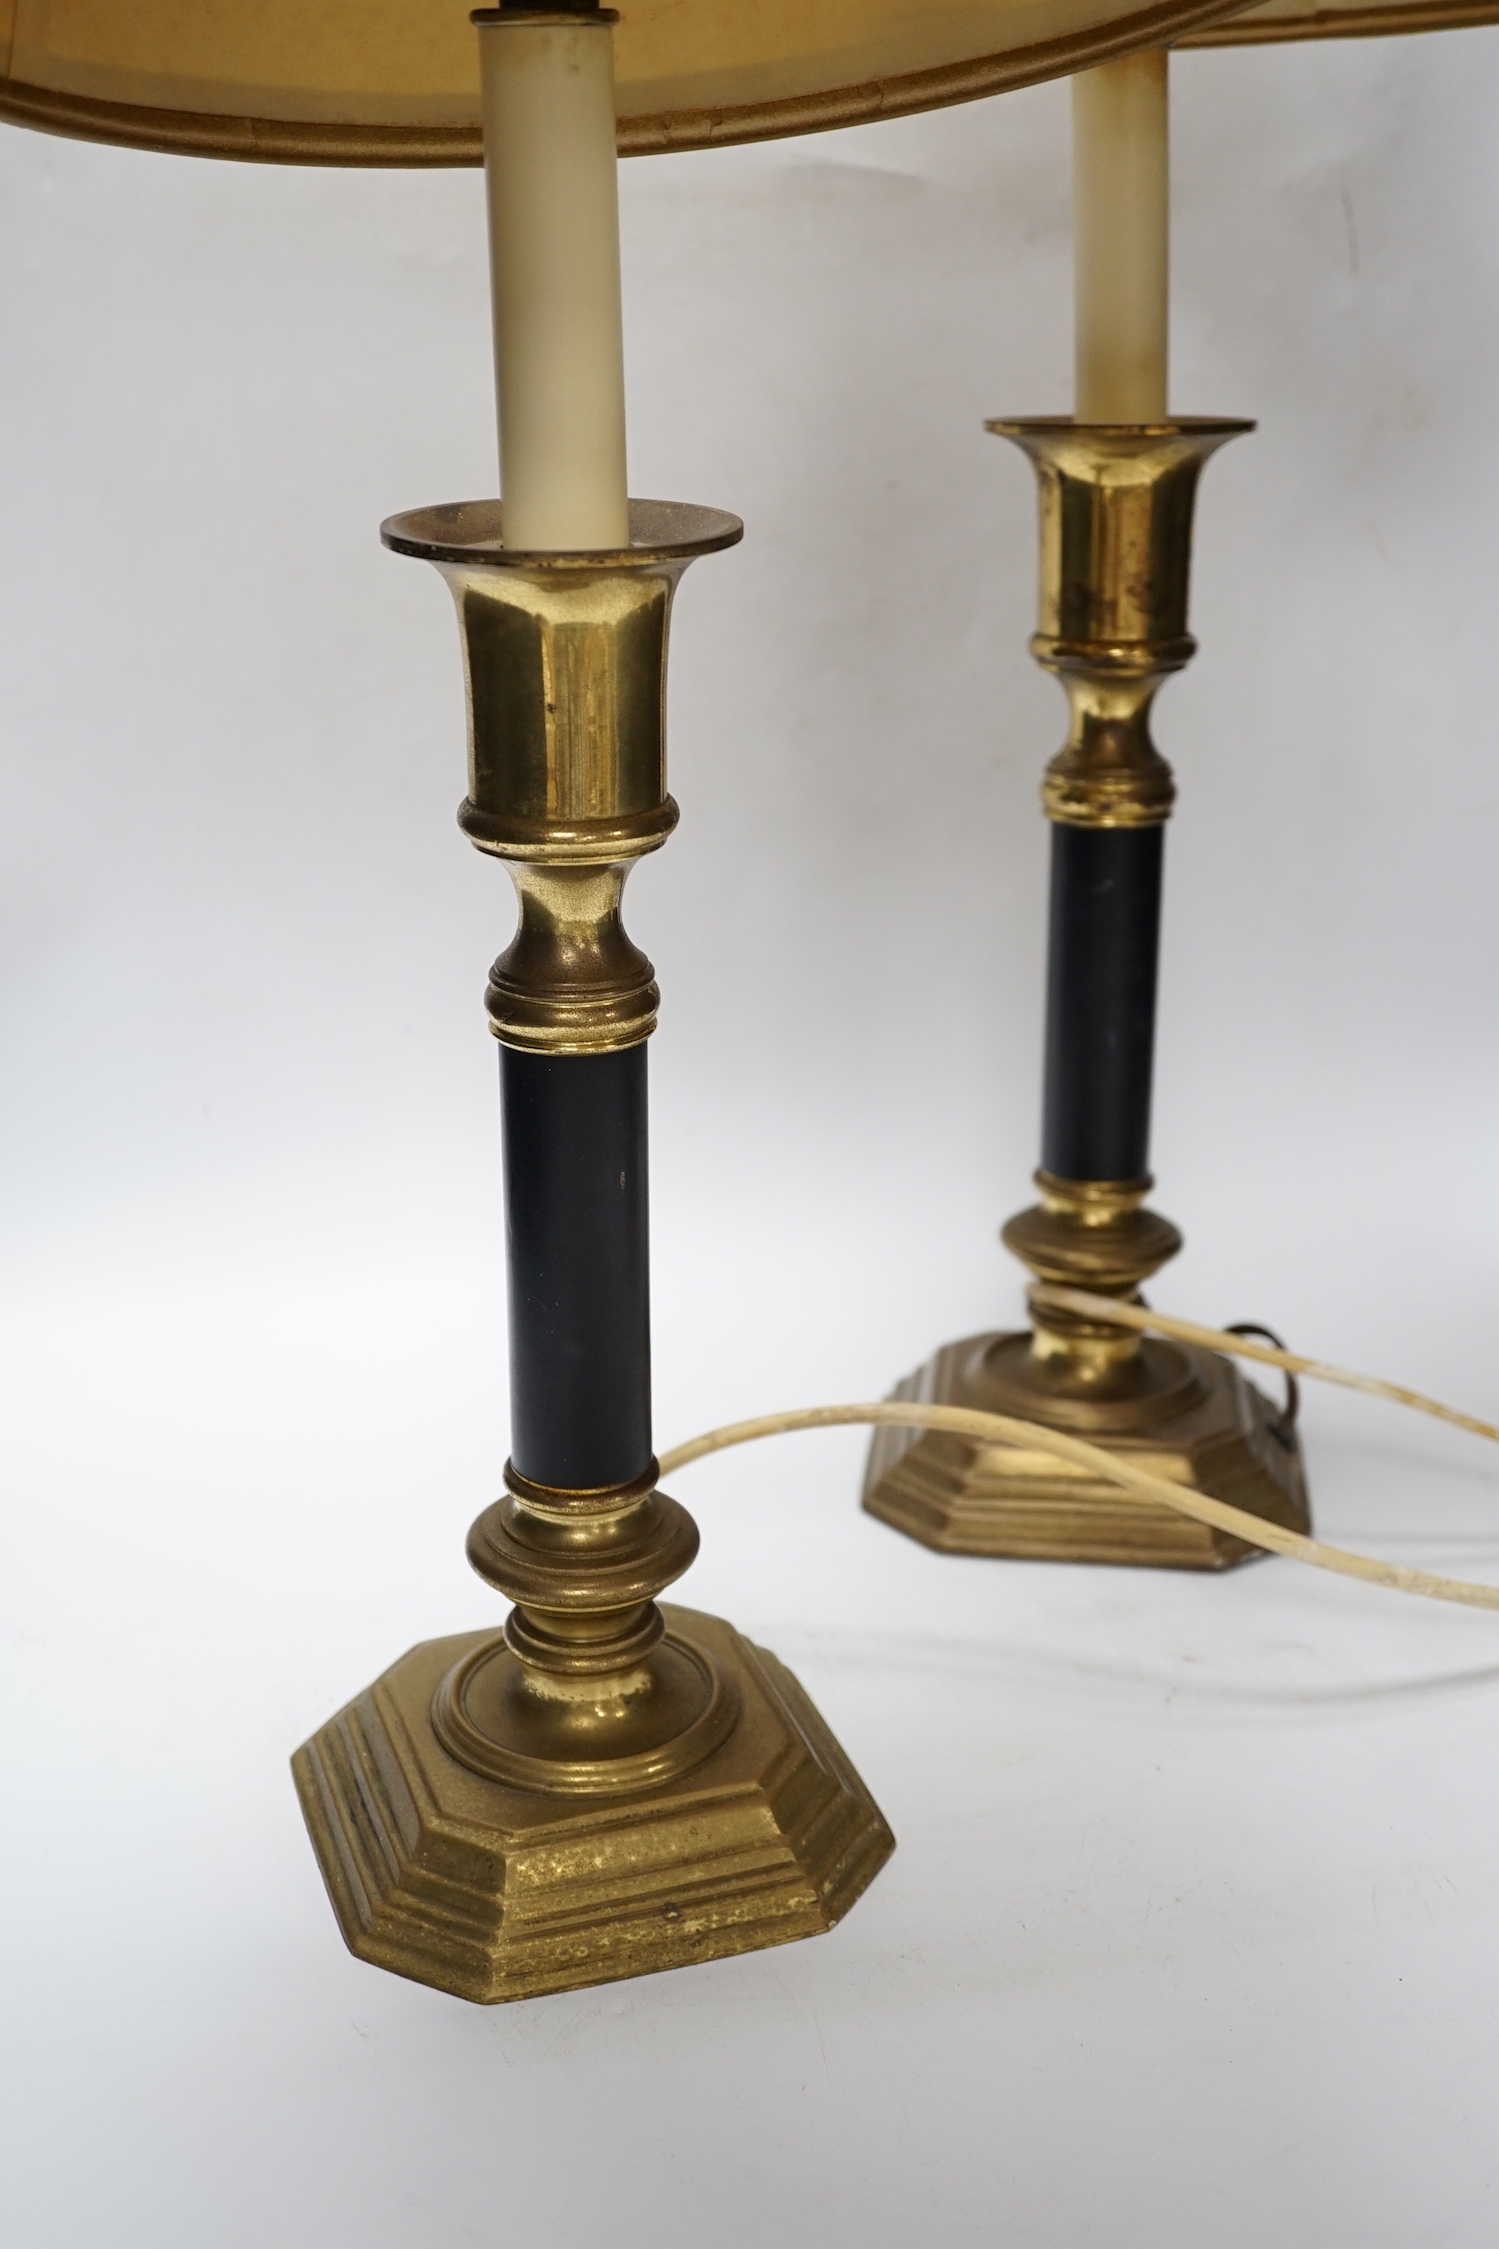 A pair of brass and black table lamps and shades, 64.5cm high